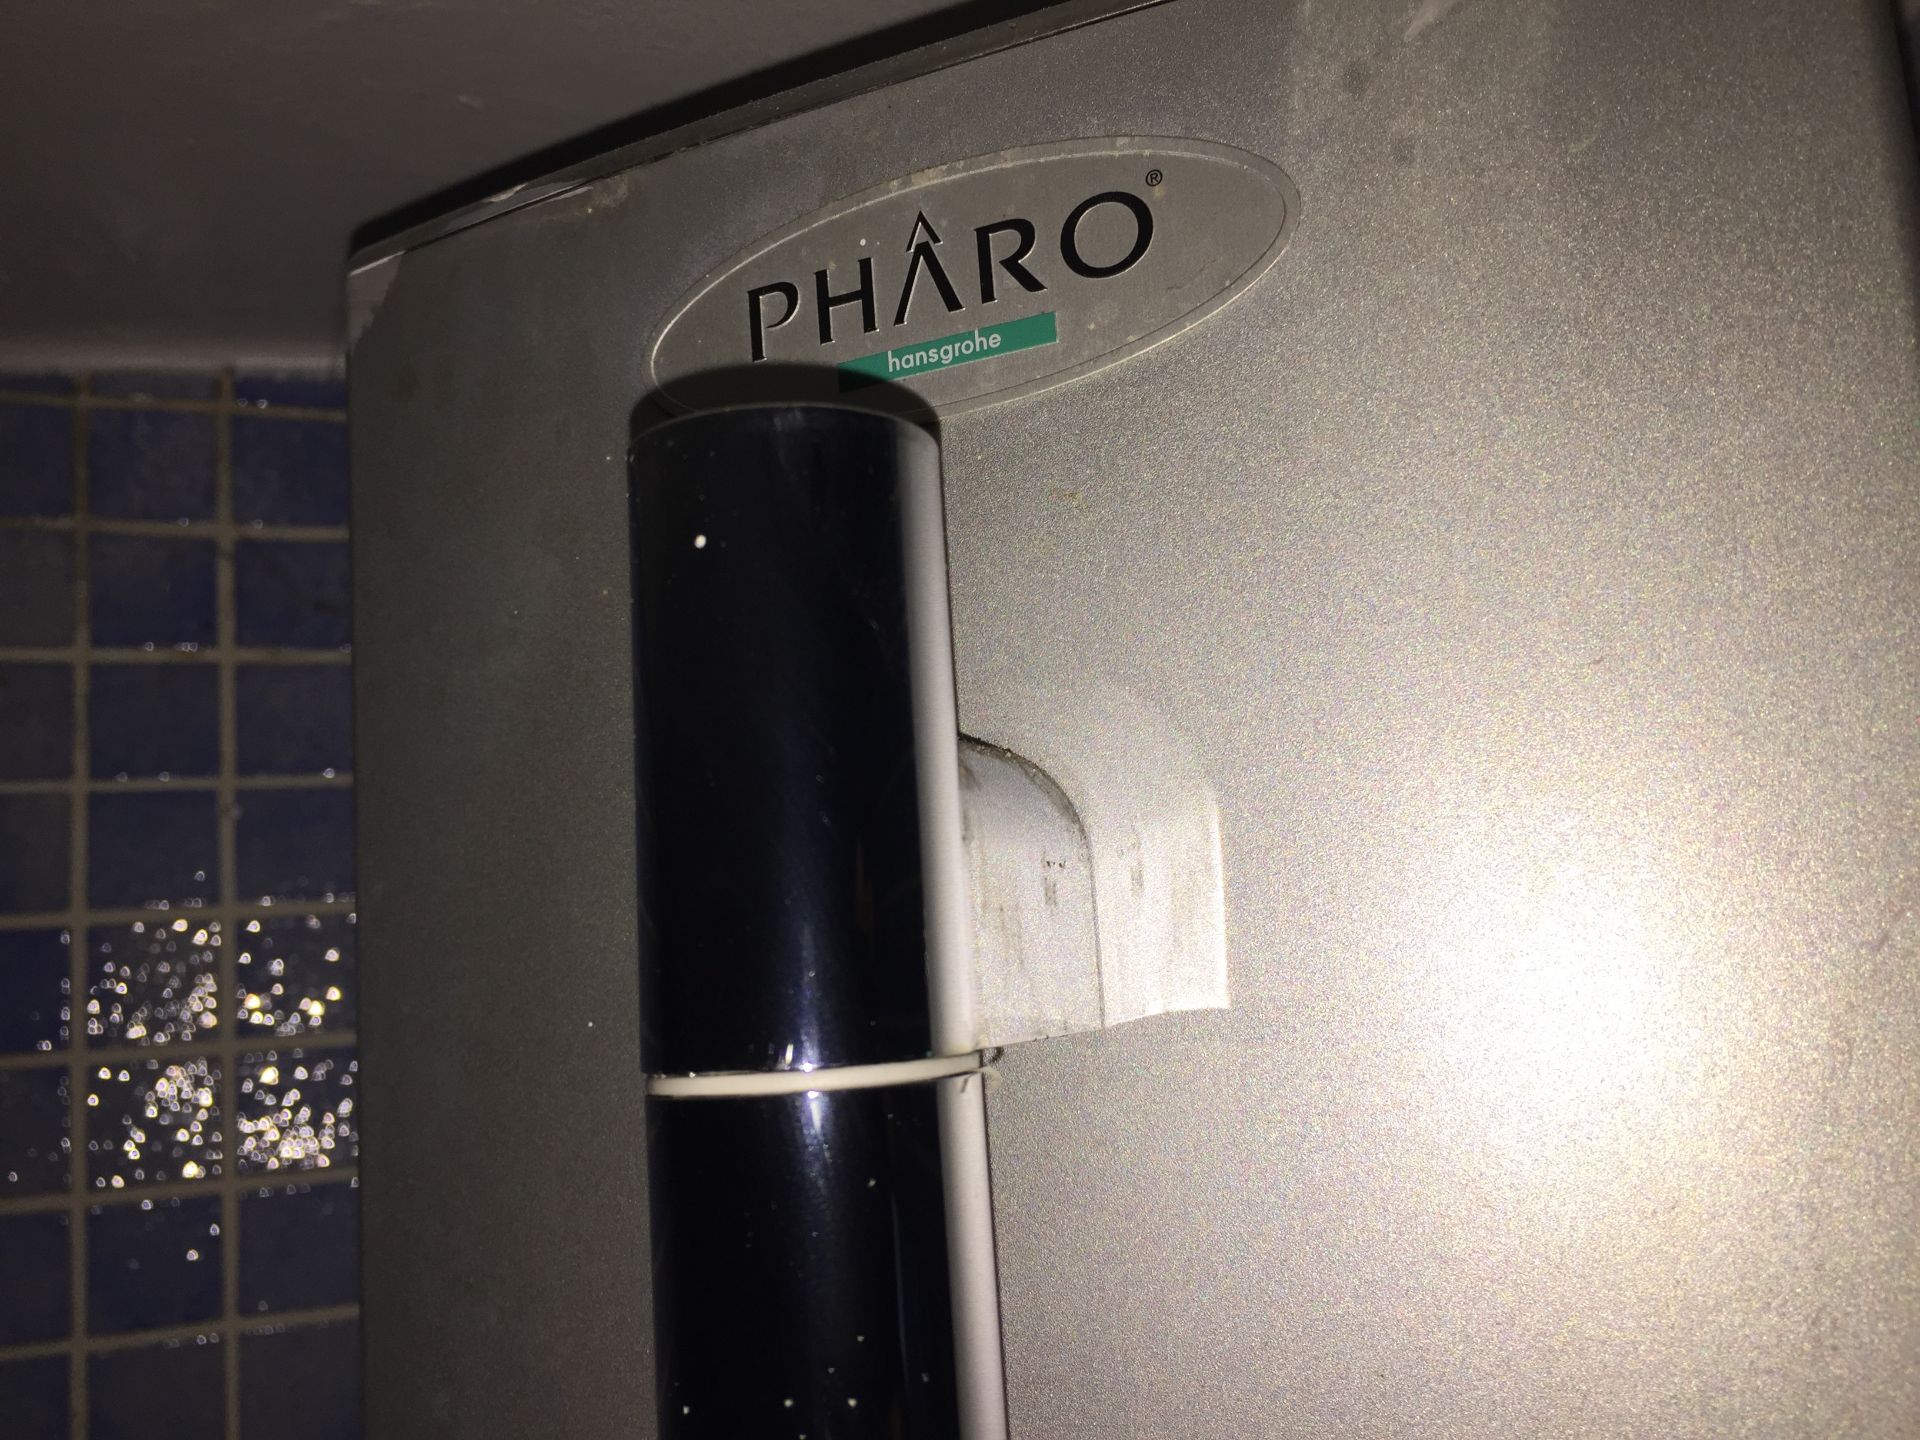 1 x Hansgrohe Pharo "Colonna Doccia" Upright Bathroom Shower Panel - Preowned In Good Condition - - Image 6 of 7